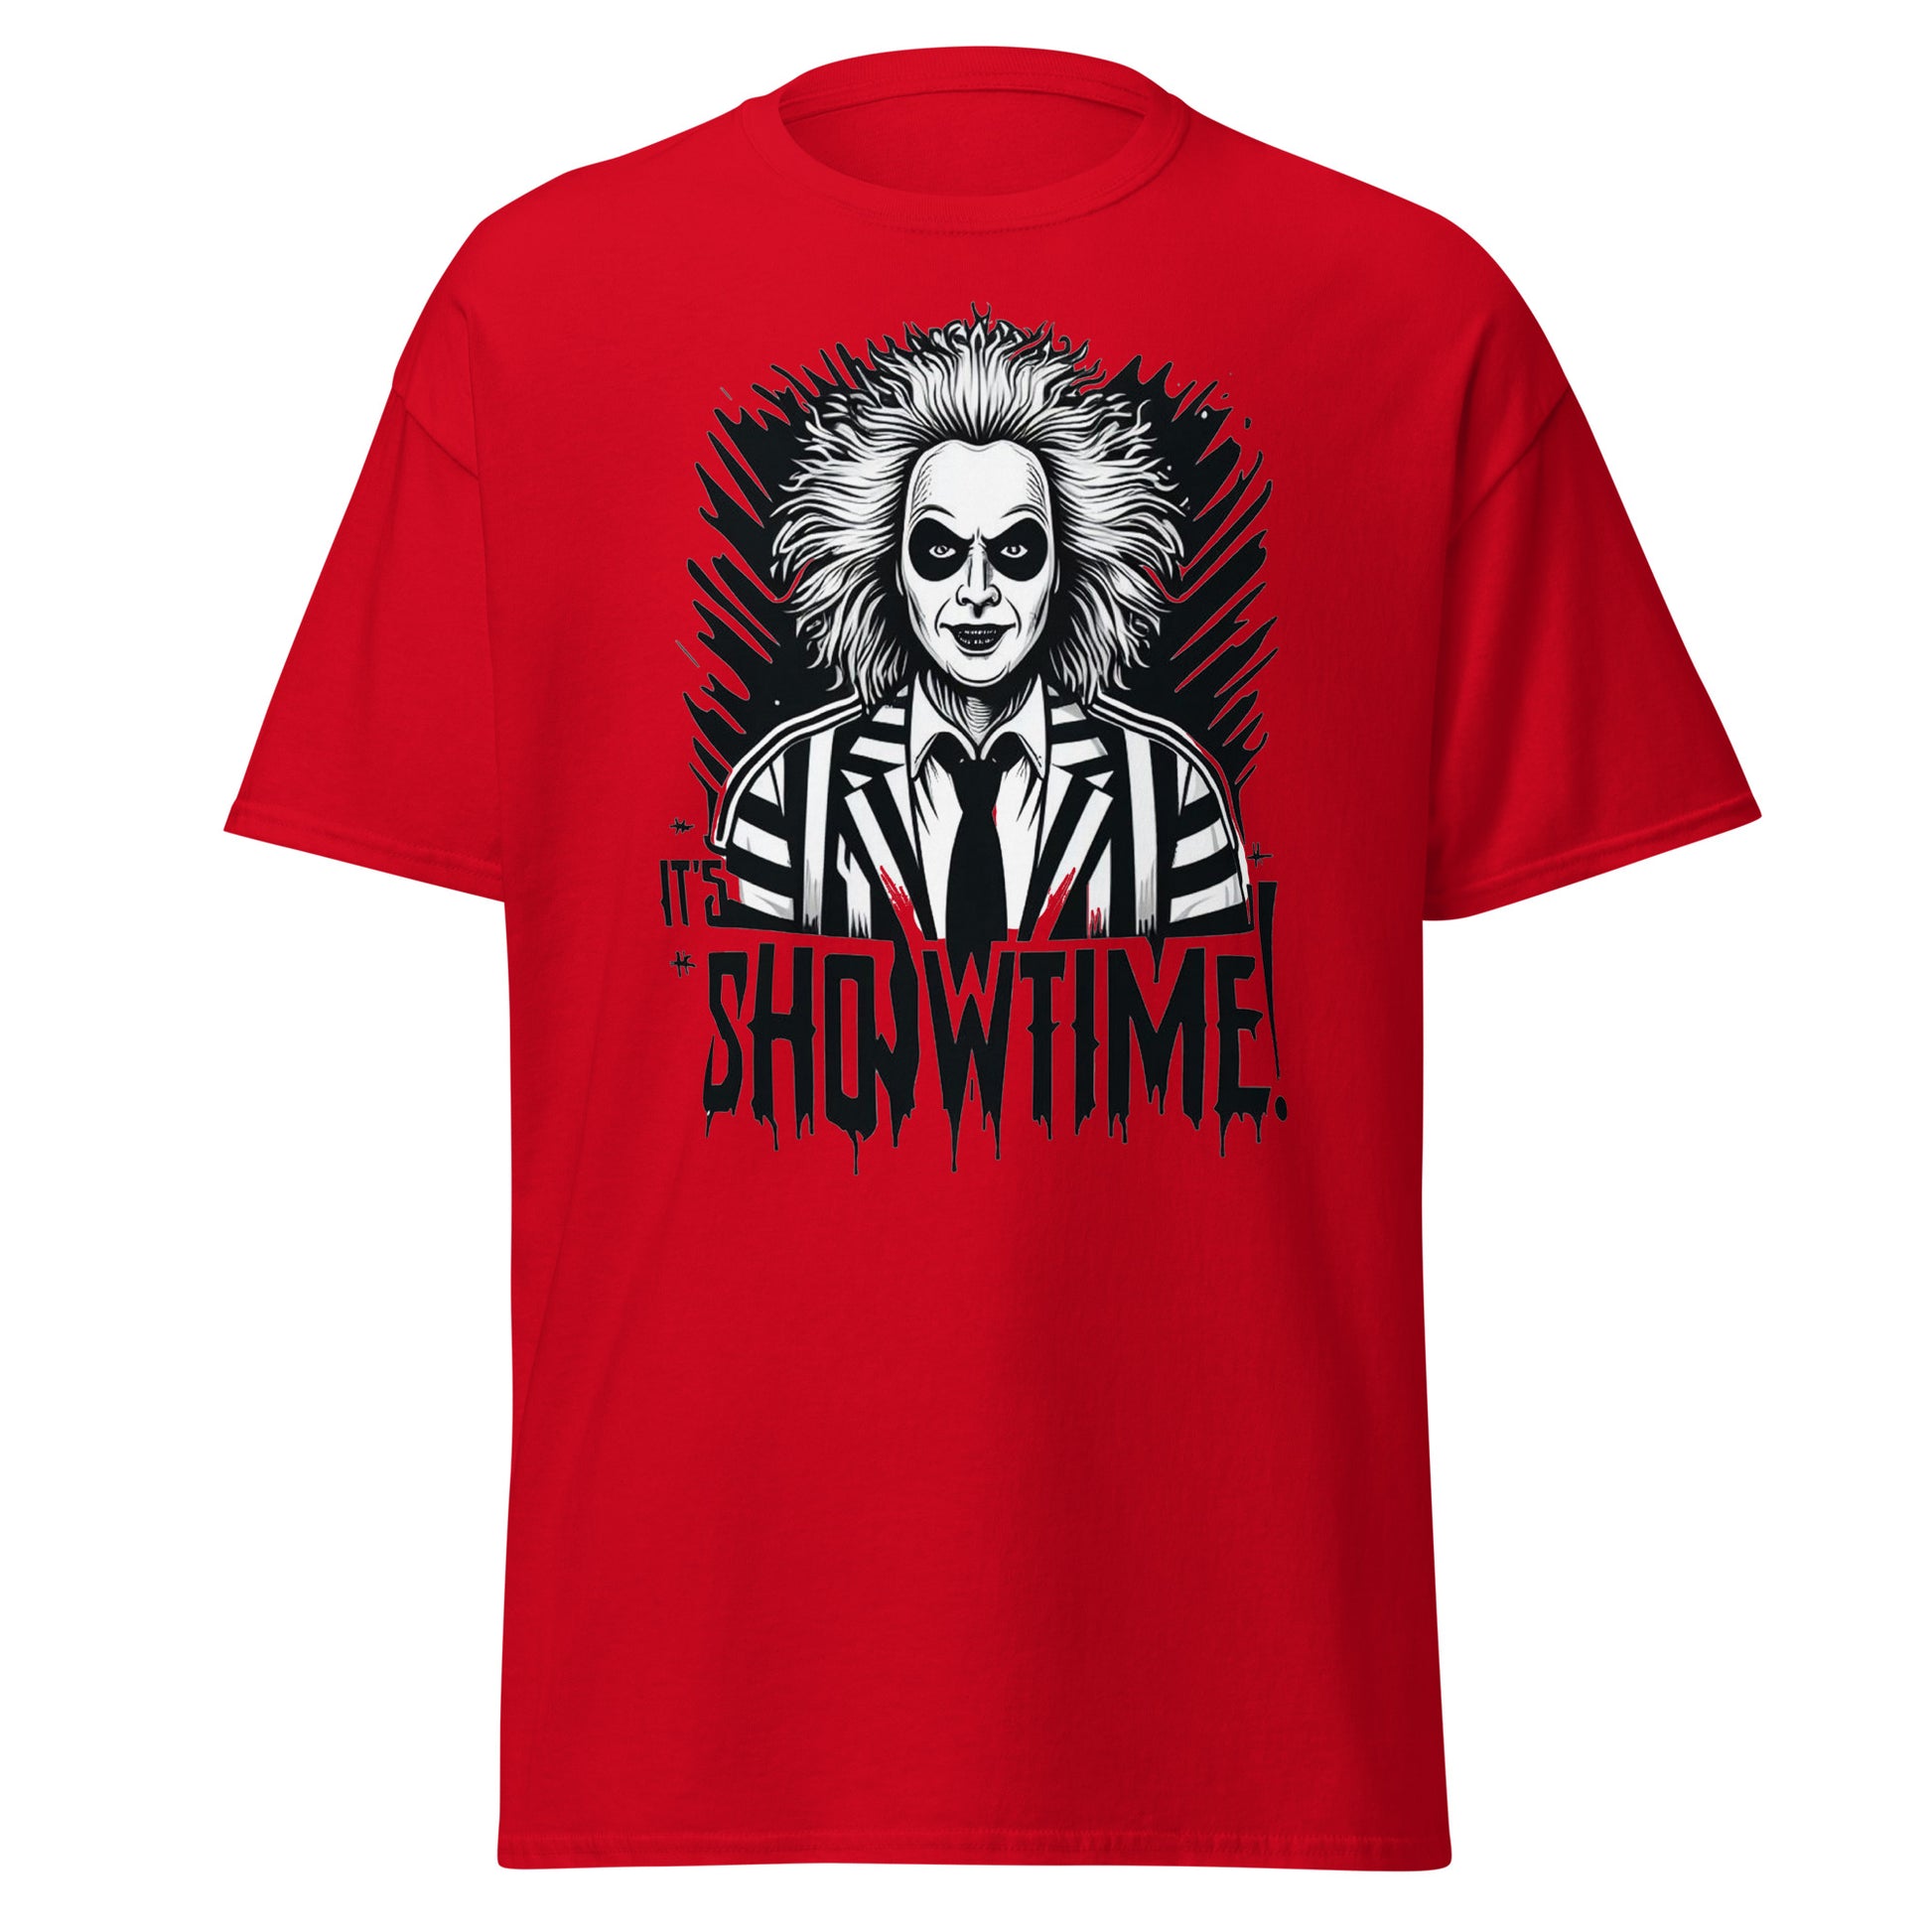 Beetlejuice 2 Classic T-Shirt - Red